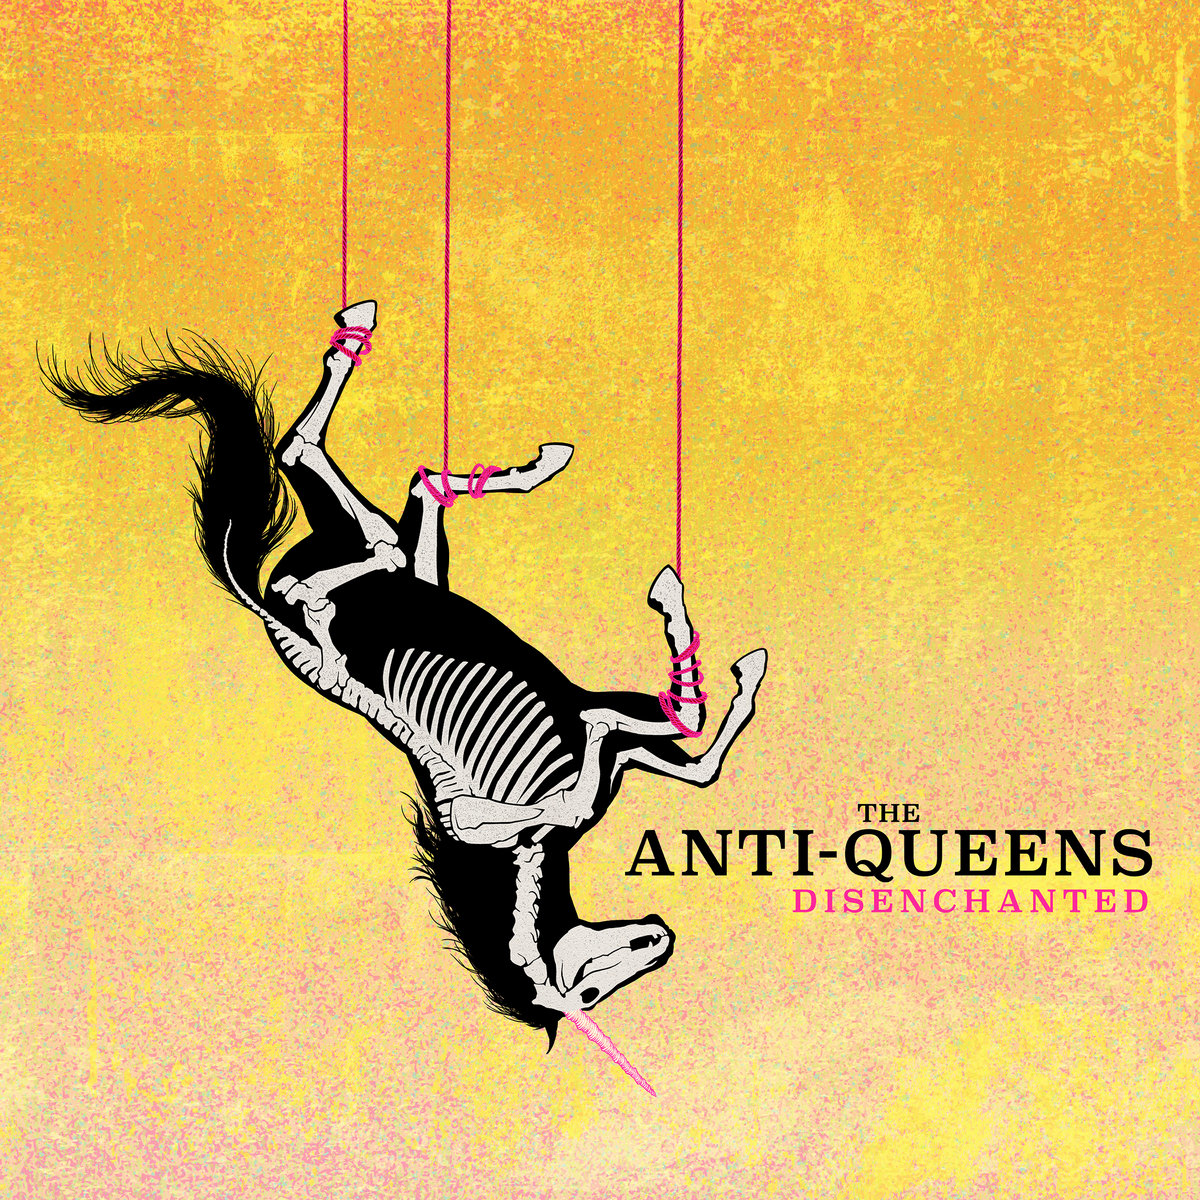 ALBUM REVIEW: Disenchanted by The Anti-Queens